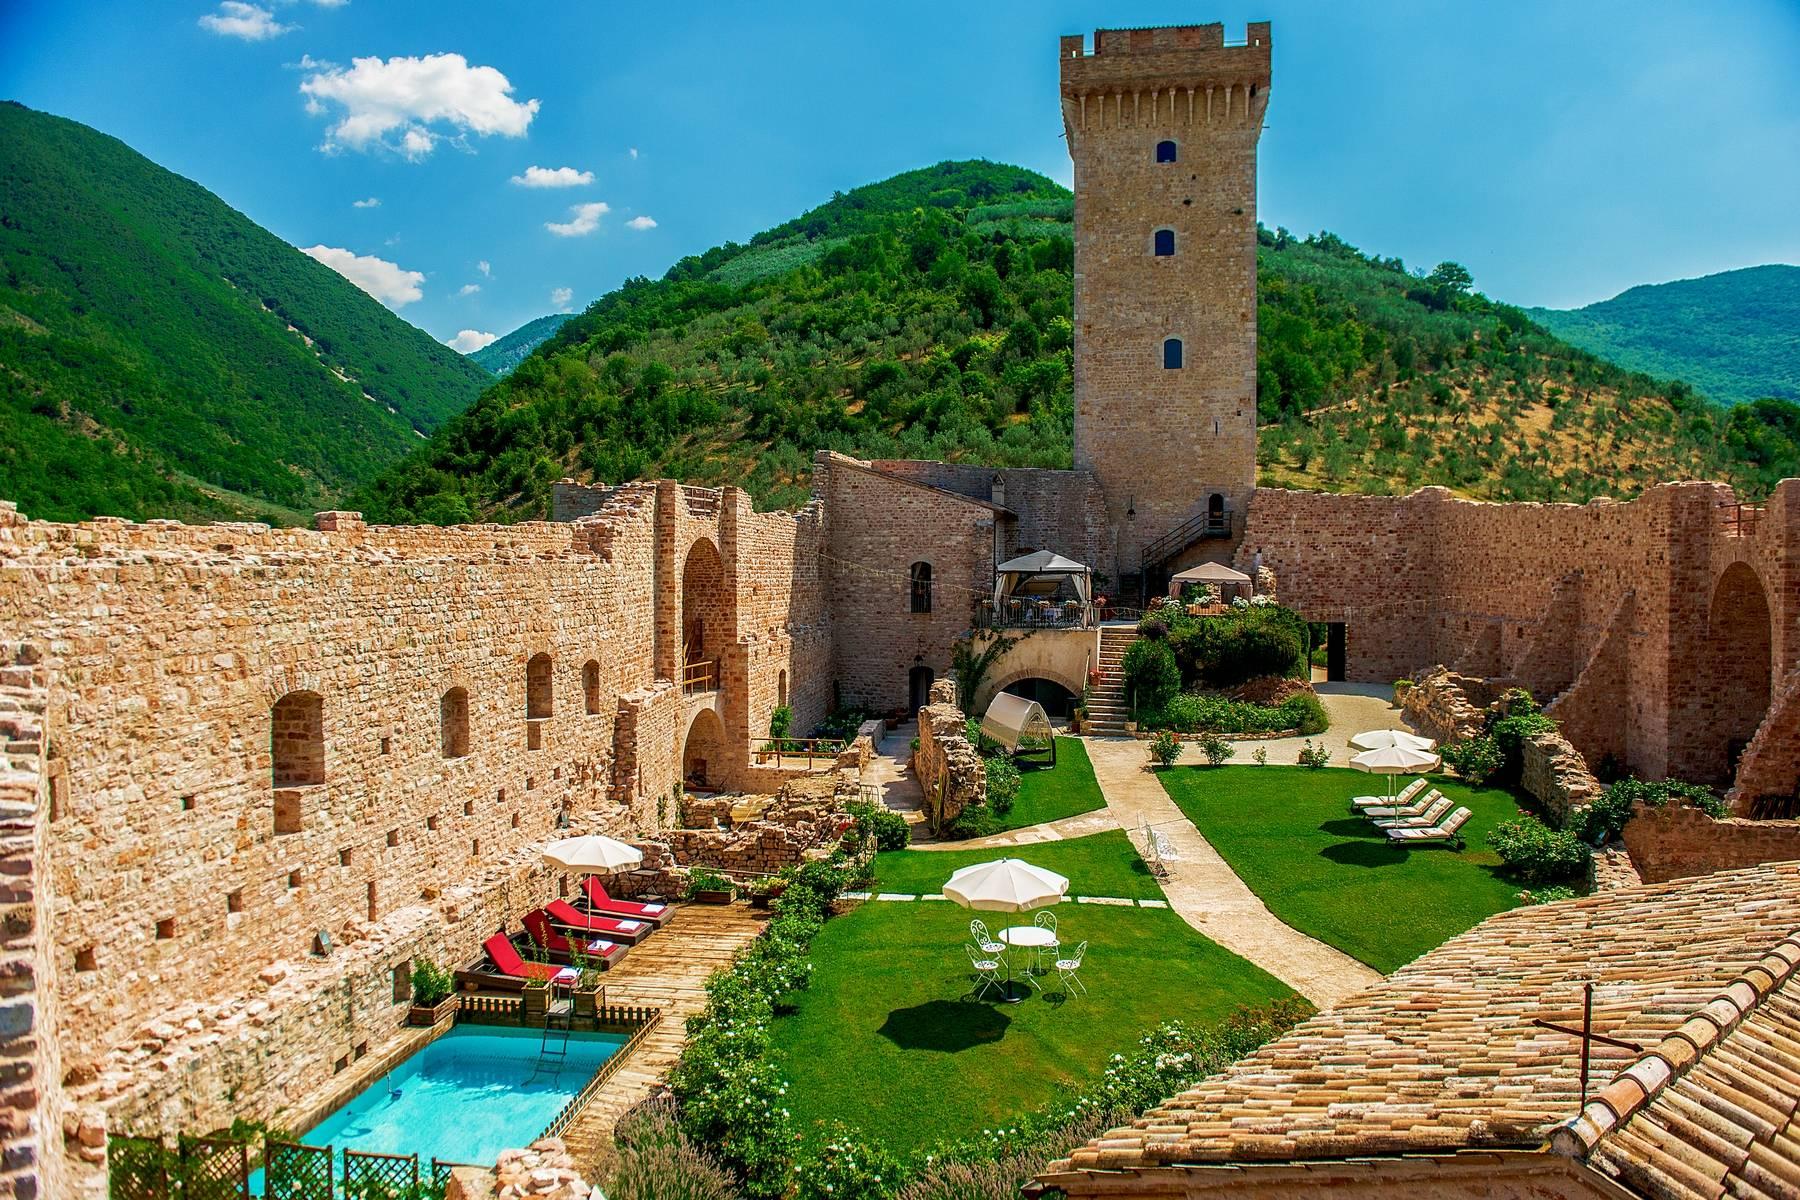 A magnificent castle in the Umbrian hillside - 1